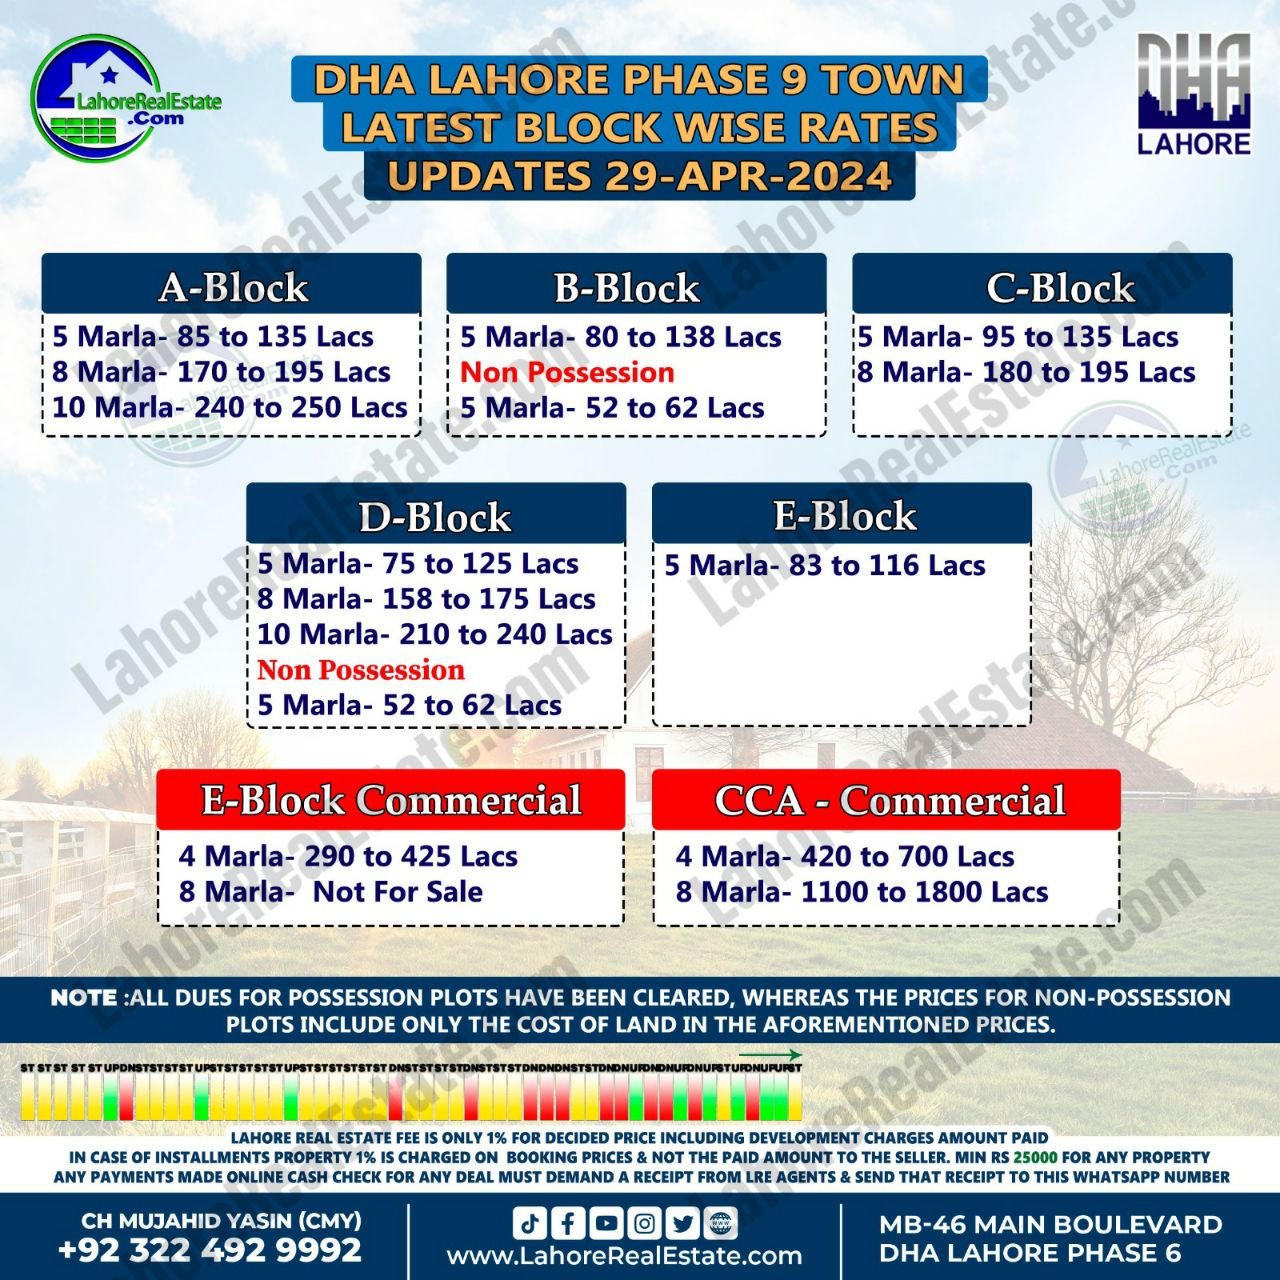 DHA Lahore Phase 9 Town Plot Prices Blockwise Rates 29th April 2024